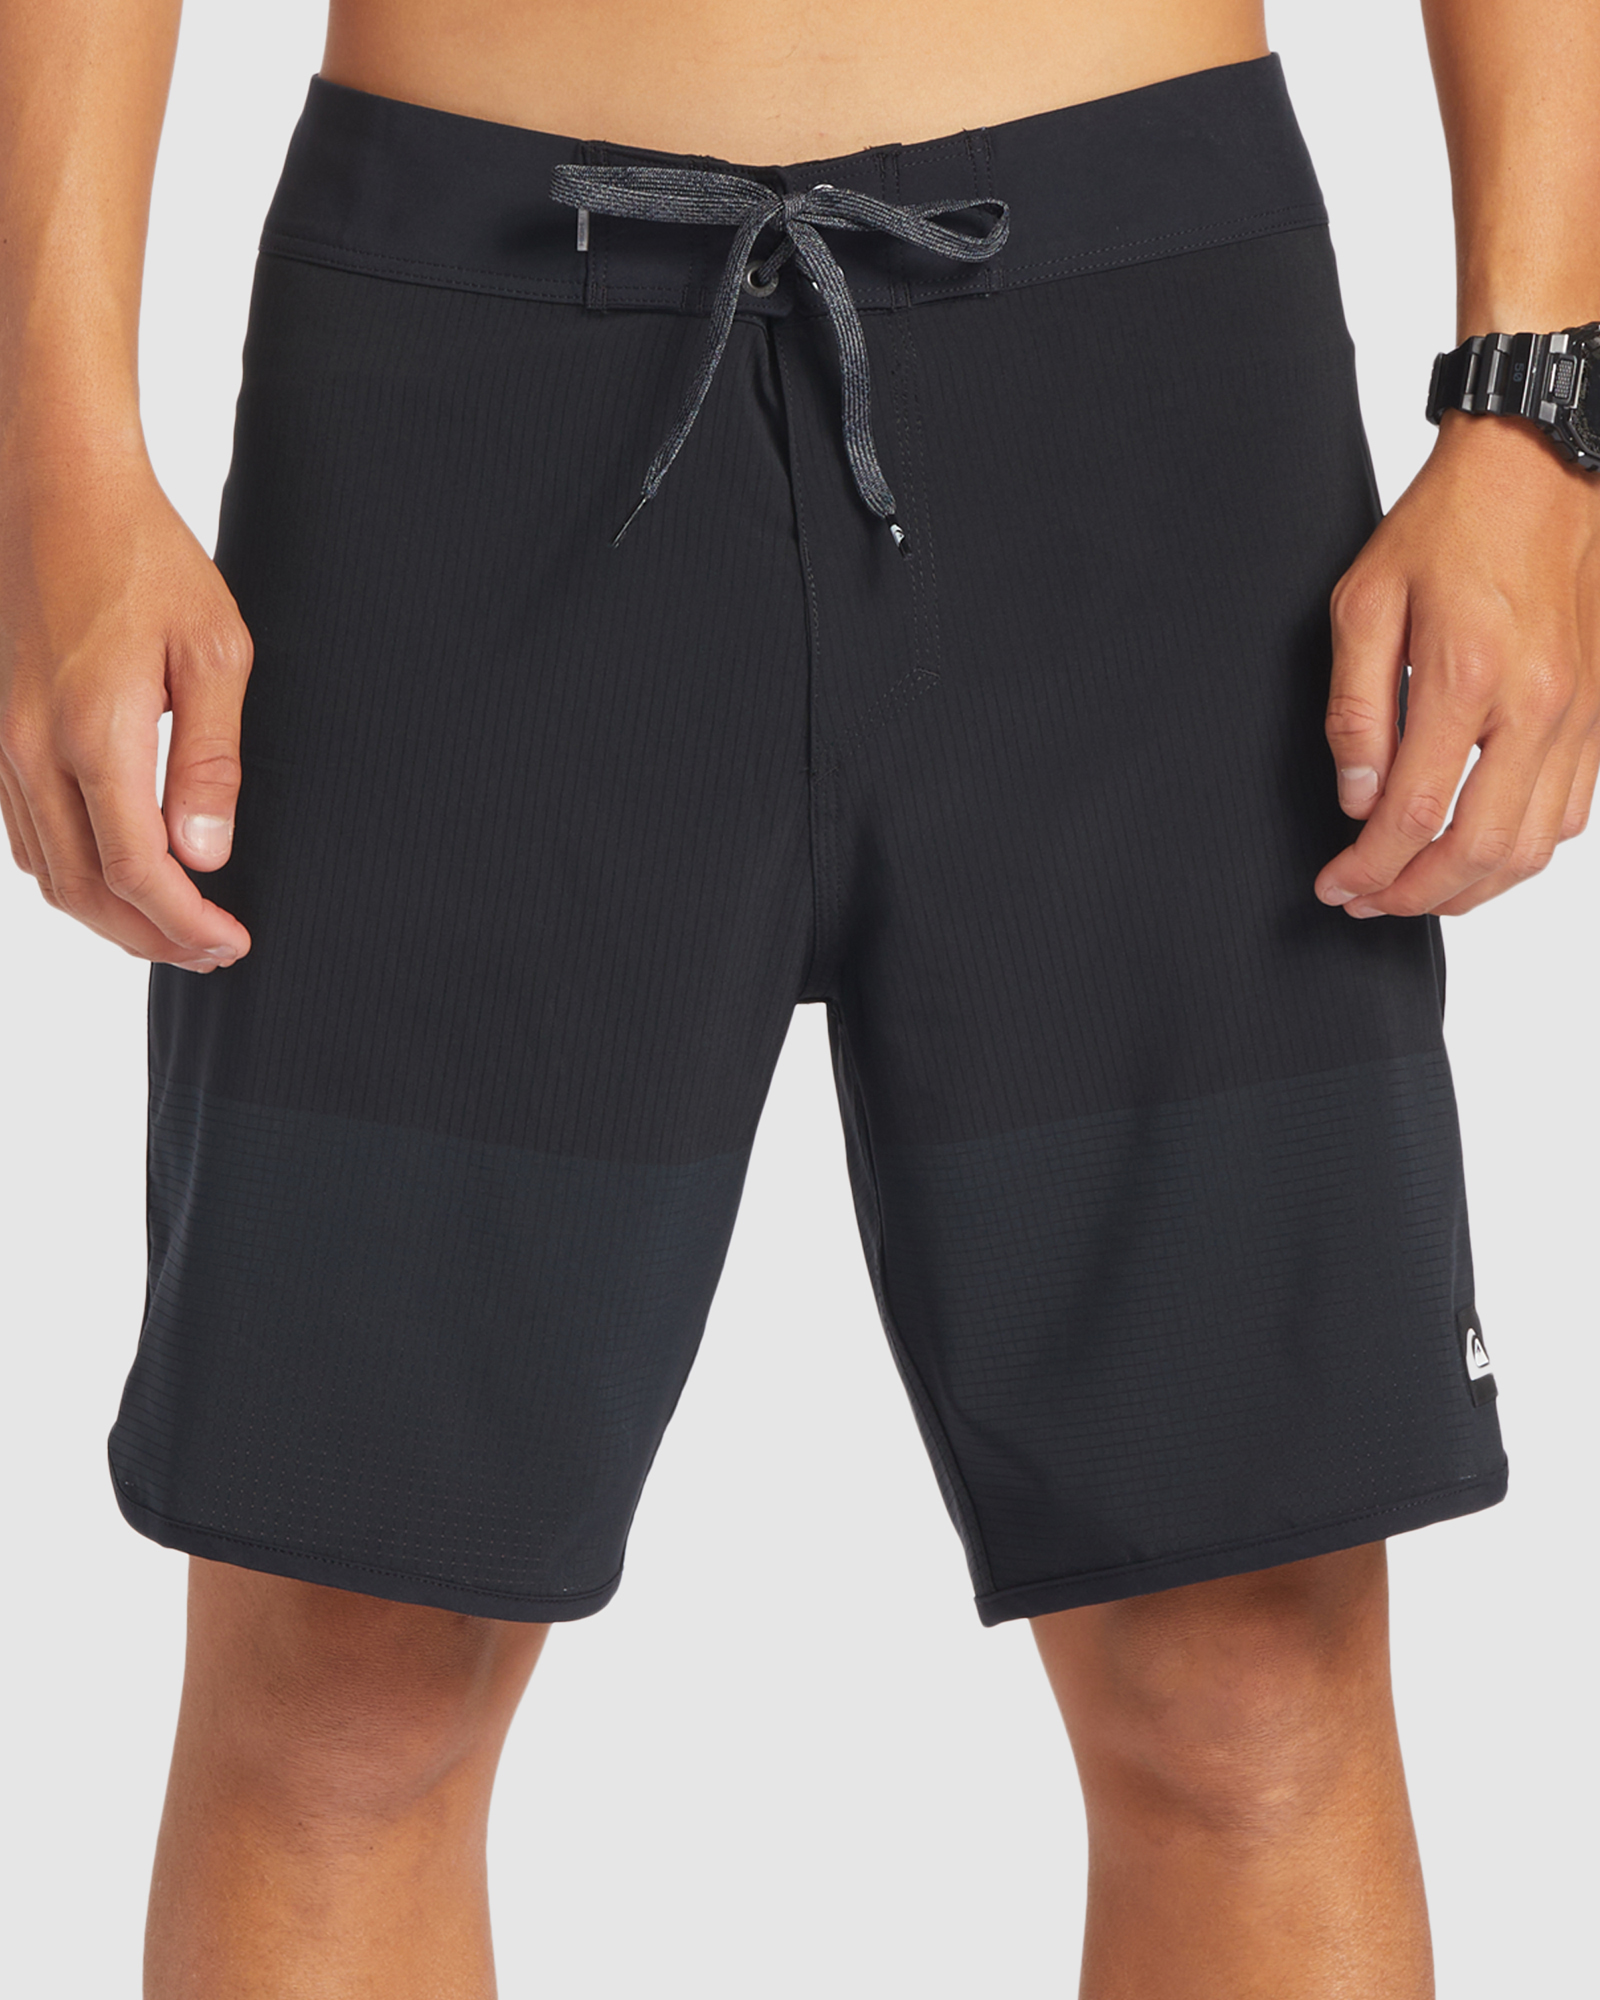 Quiksilver Mens Highlite Scallop 19 Inch Board Shorts - Black